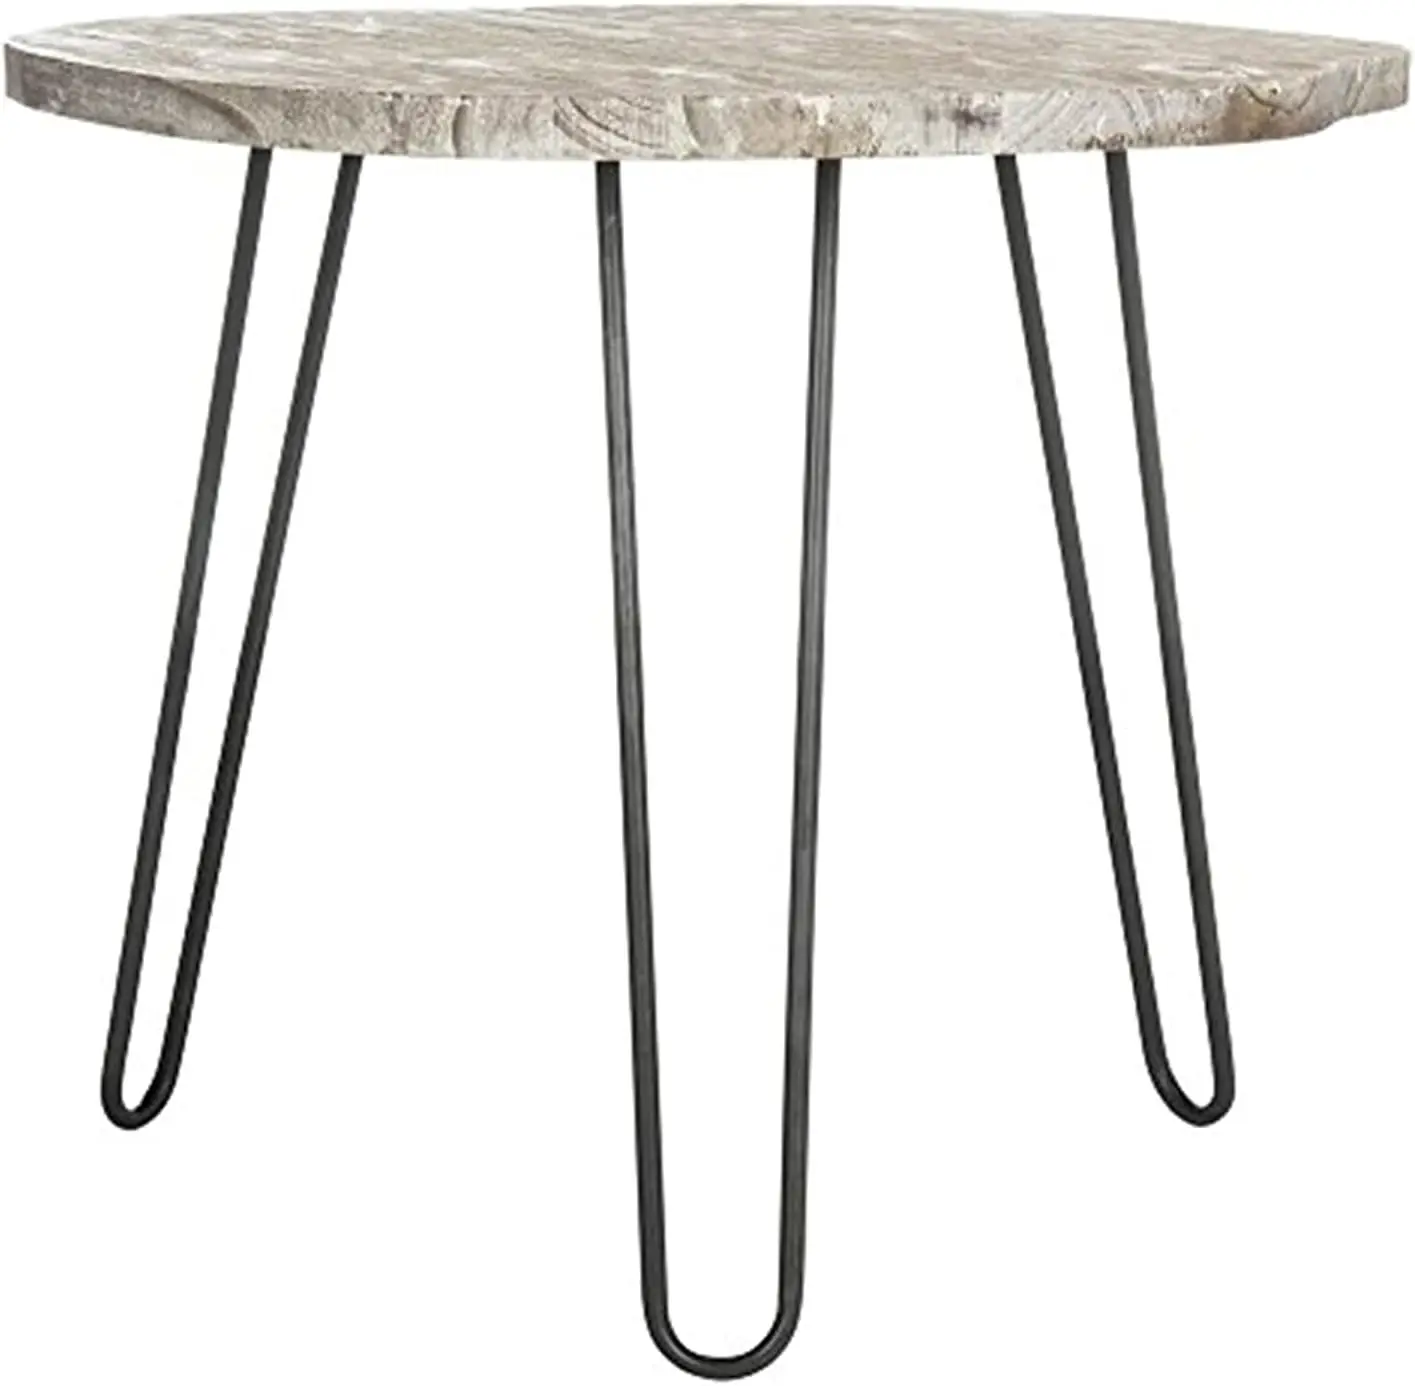 

Safavieh Home Collection Mindy Natural Wood Top 30-inch Dining Table